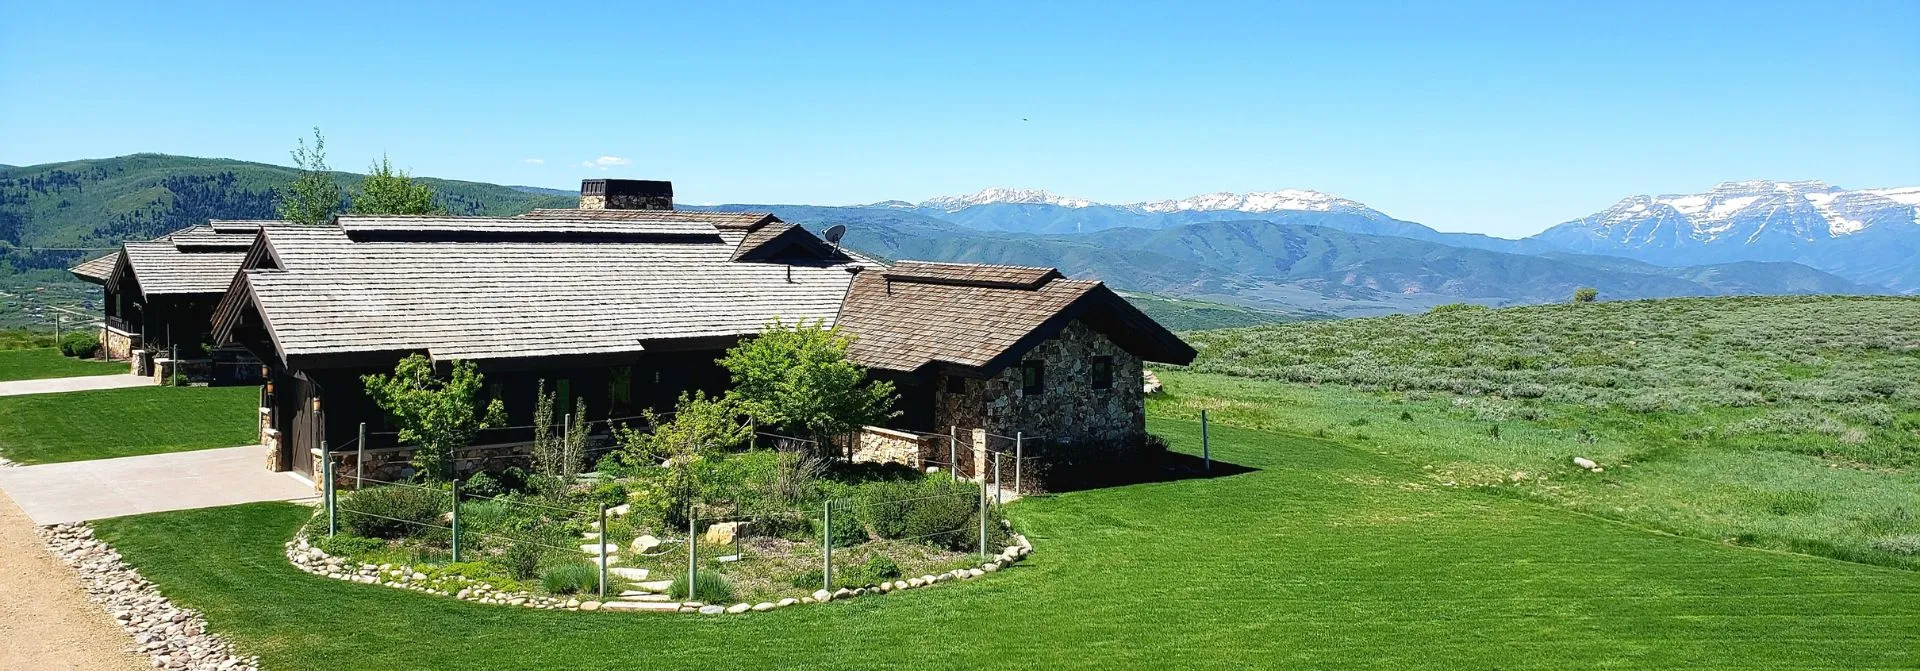 Wolf Creek Ranch Properties for Sale